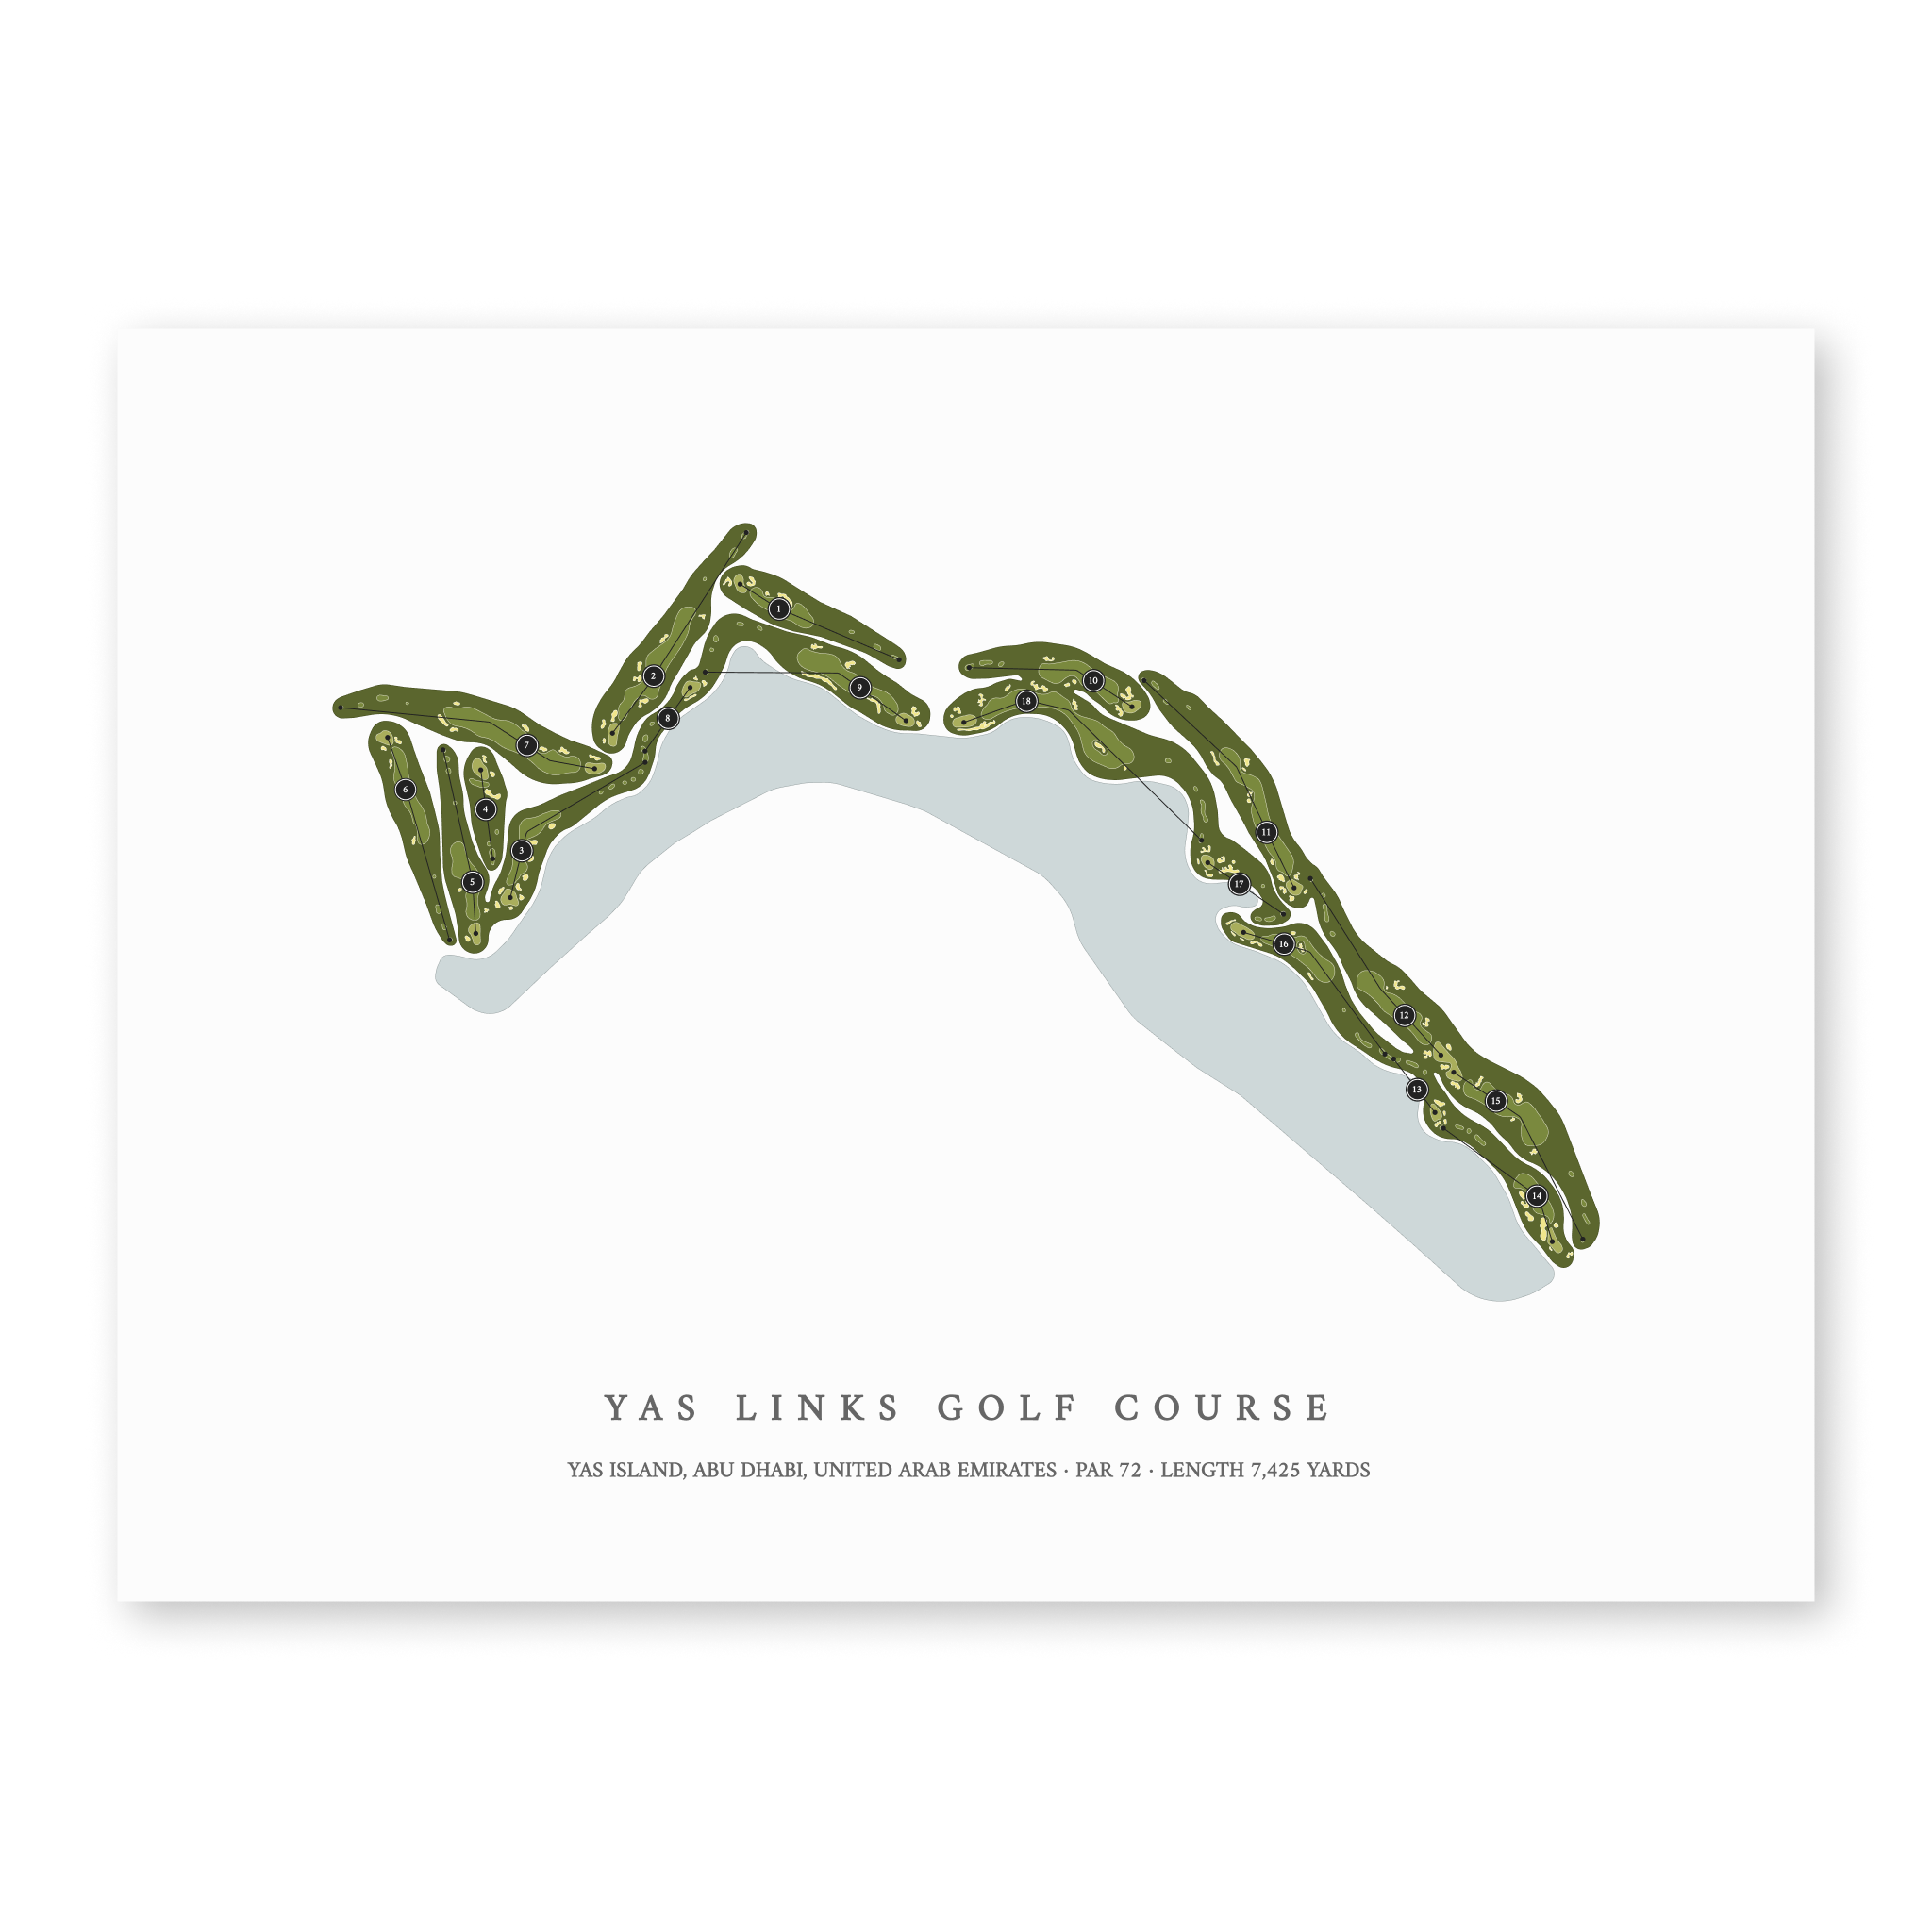 Yas Links Golf Course | Golf Course Map | Unframed With Hole Numbers #hole numbers_yes